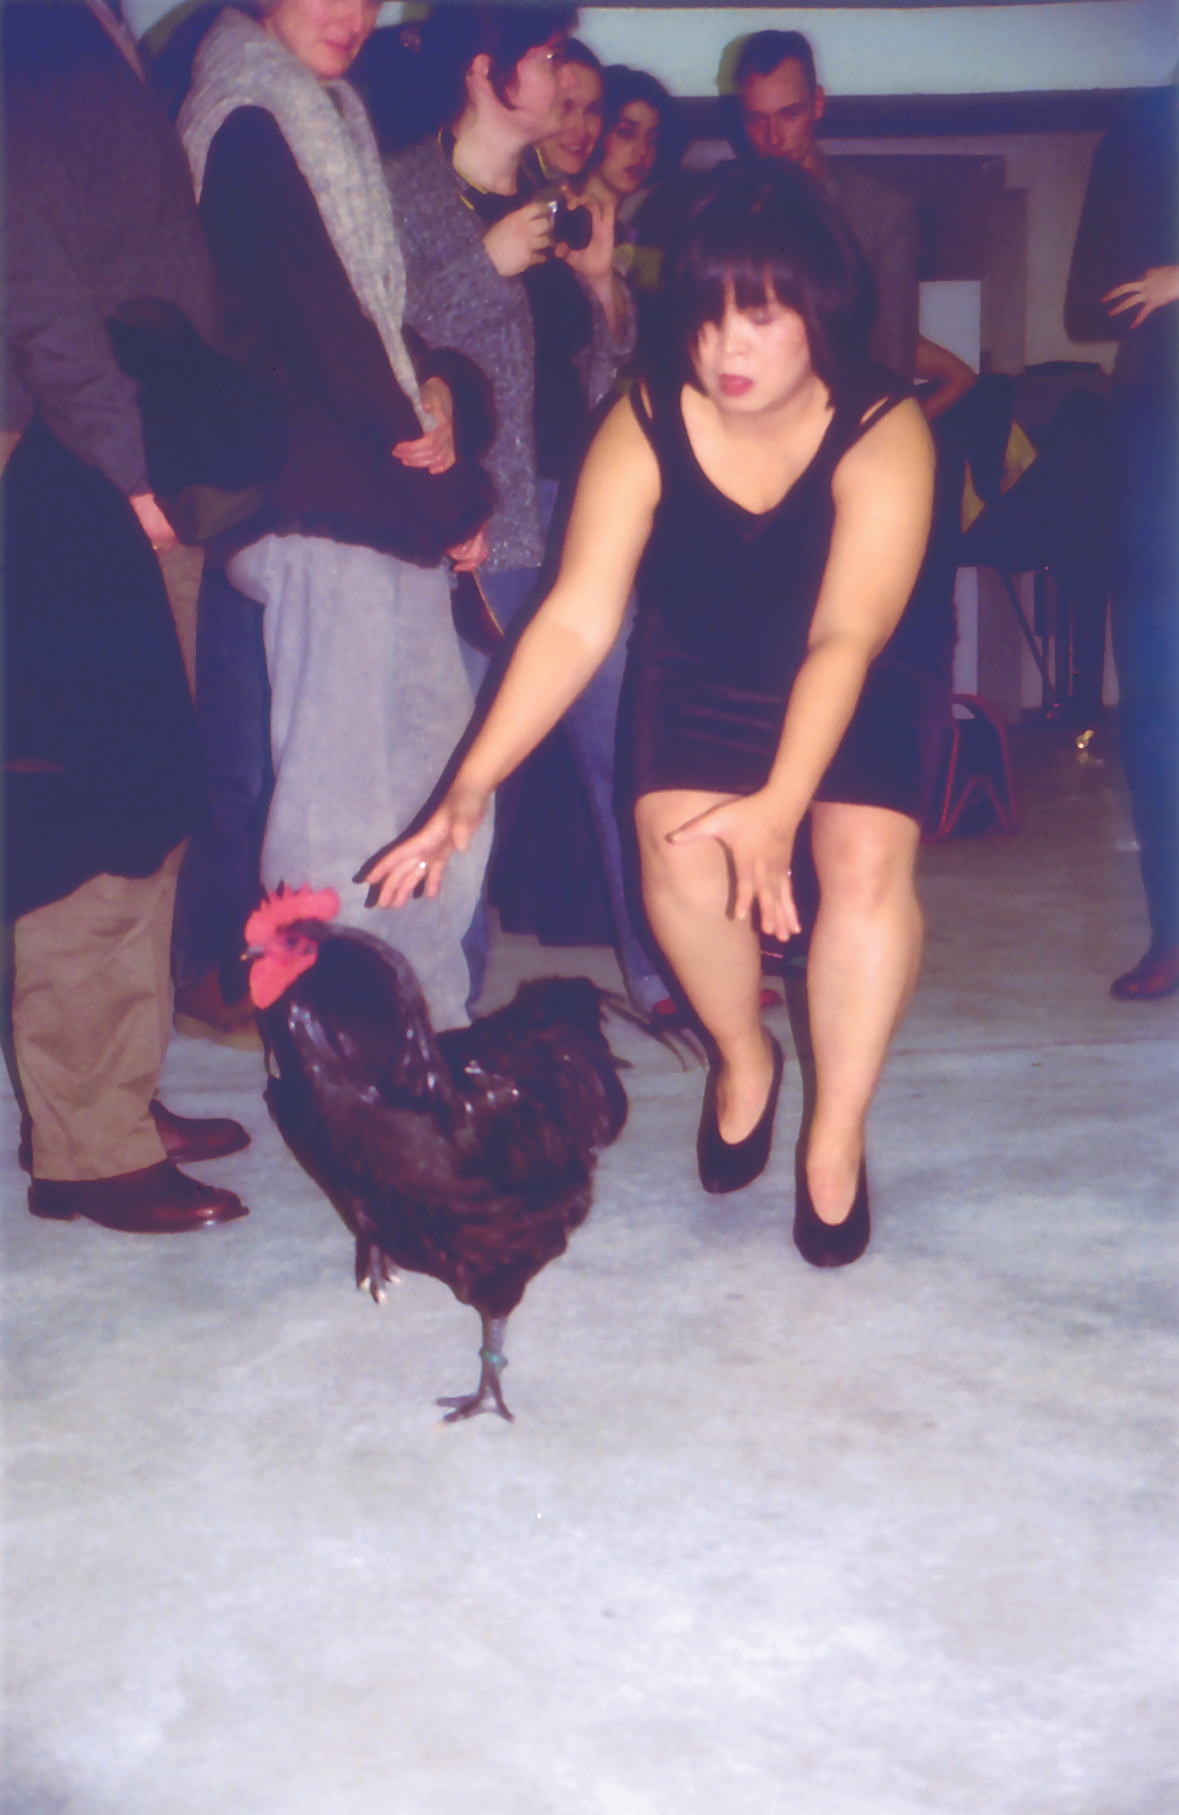 Melati Suryodarmo, “Why Let the Chicken Run?”, performed at A little bit of History Repeated, group exhibition at Kunst Werke, Berlin ,2002